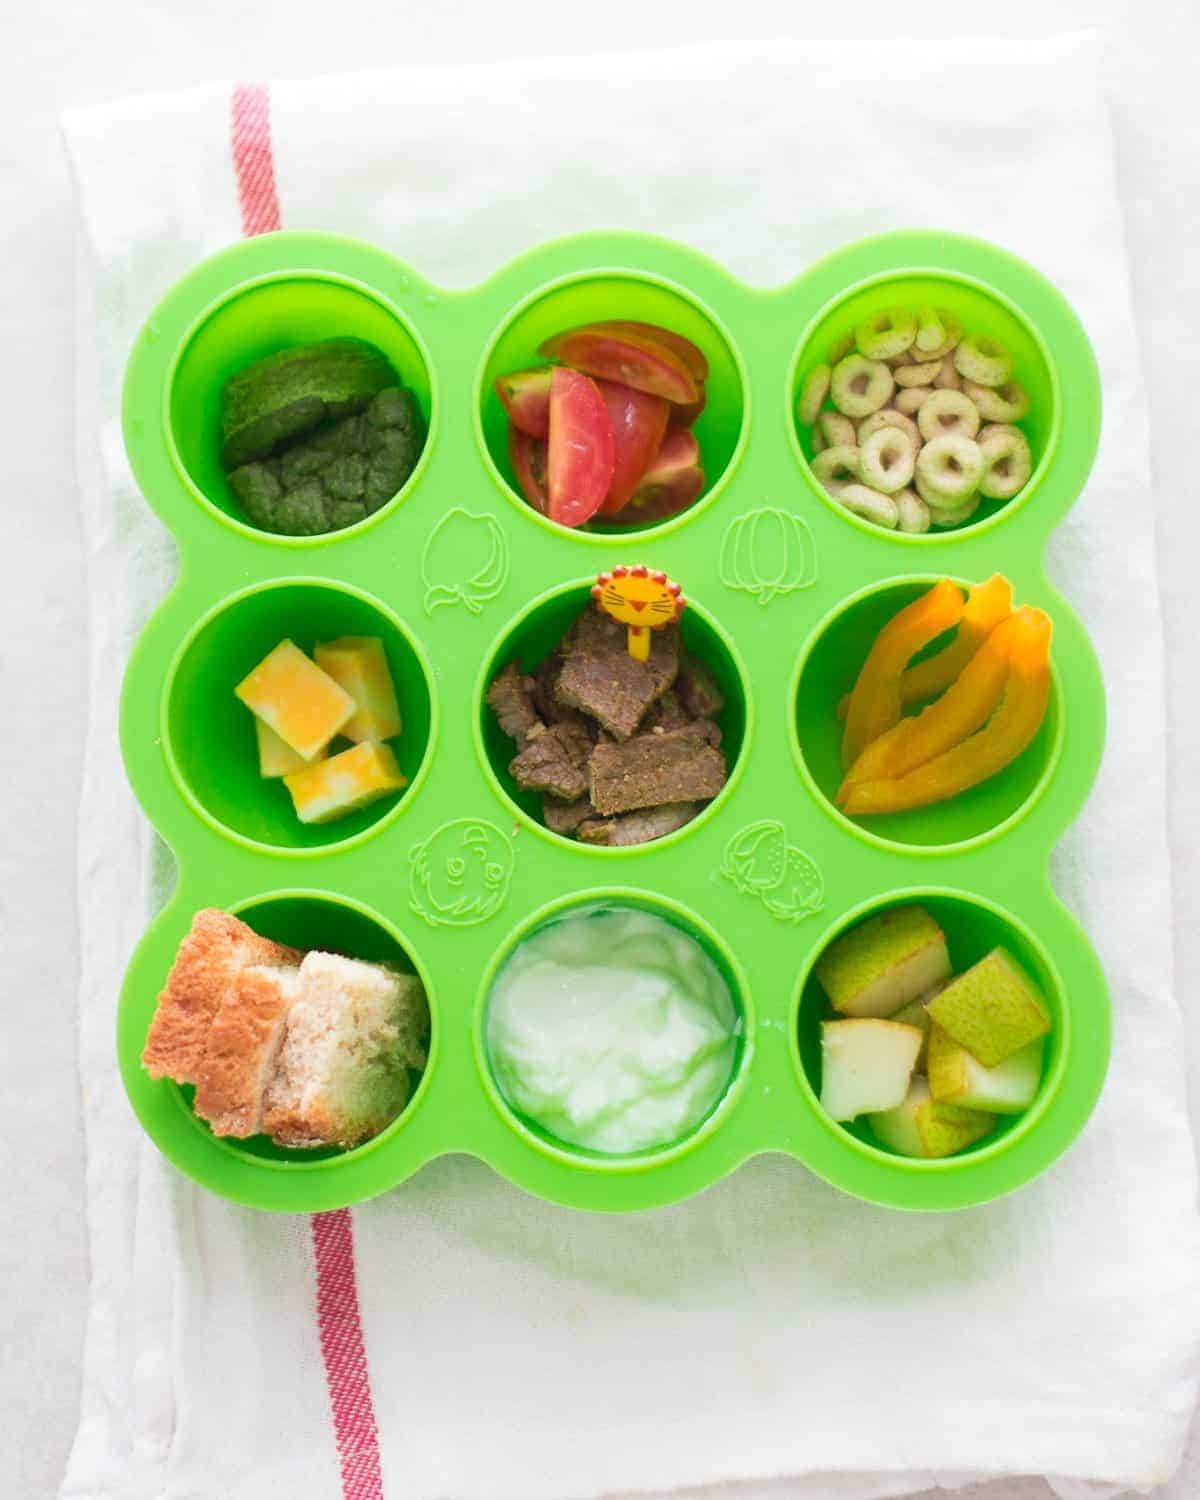 a snack tray with an assortment of finger friendly foods, like cereal, cheese, bell peppers, and cubed beef.